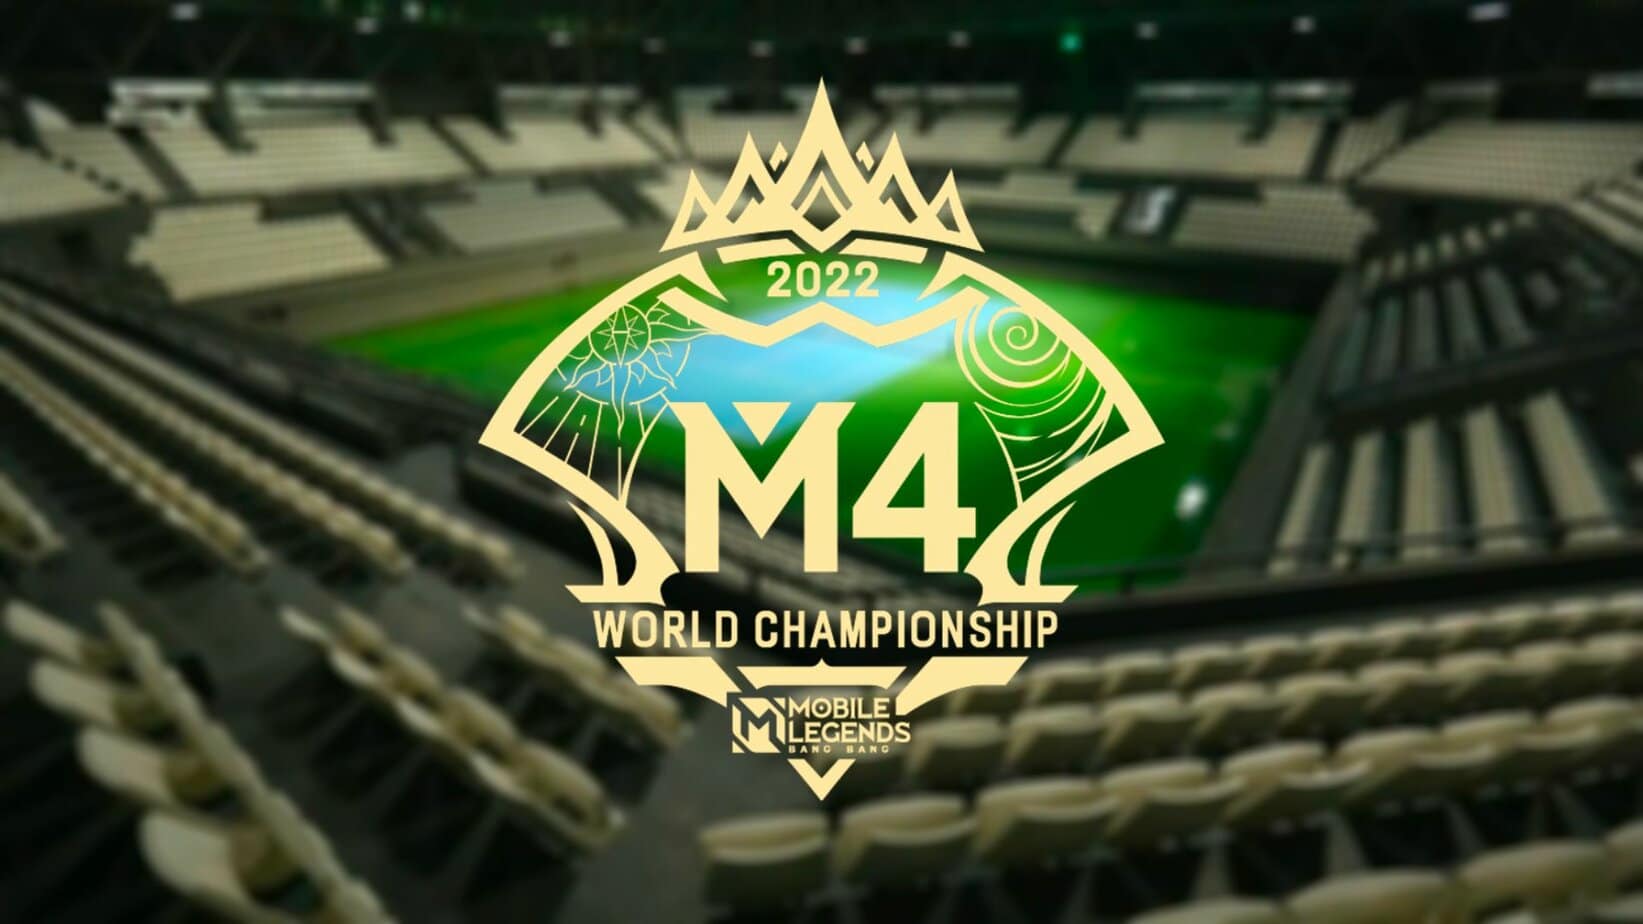 M4 World Championship knockout stage: Schedule, results